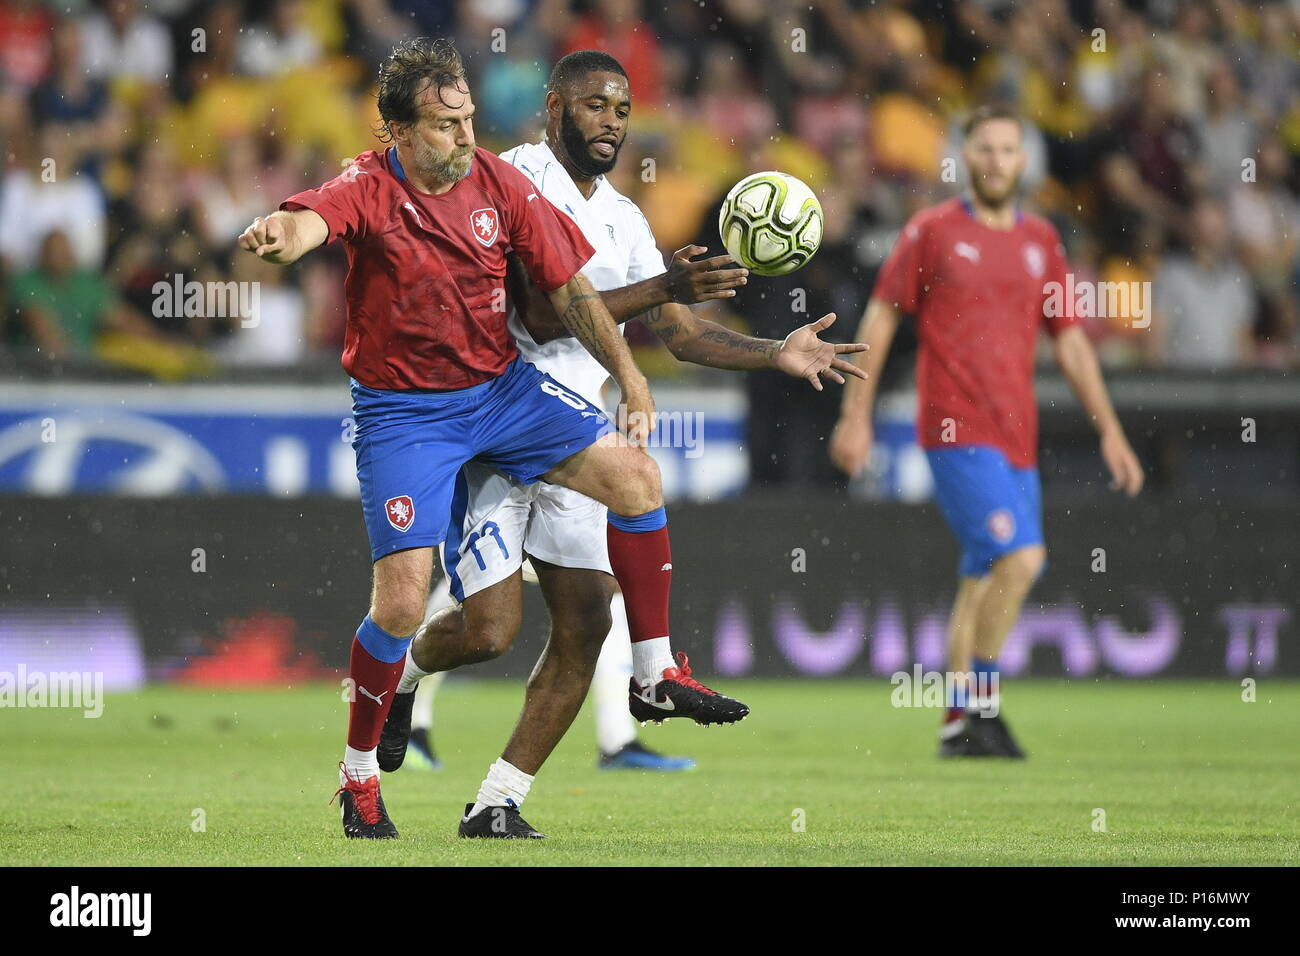 Karel Poborsky of Czech Team, left, and Alex Song of TR10 World Team in action during the match. Former captain of the Czech national football team Tomas Rosicky definitely ended his career at the age of 37 in a farewell match played despite a driving cloudburst which postponed its kickoff today, on Saturday, June 9, 2018. The Czech team, in which he played, defeated the 'team of the world,' composed of his former fellow players from Borussia Dortmund and Arsenal London, 5-2. The final goal was scored by Rosicky's four-year-old son Tomas. Weather complicated the farewell match as roughly 20 mi Stock Photo